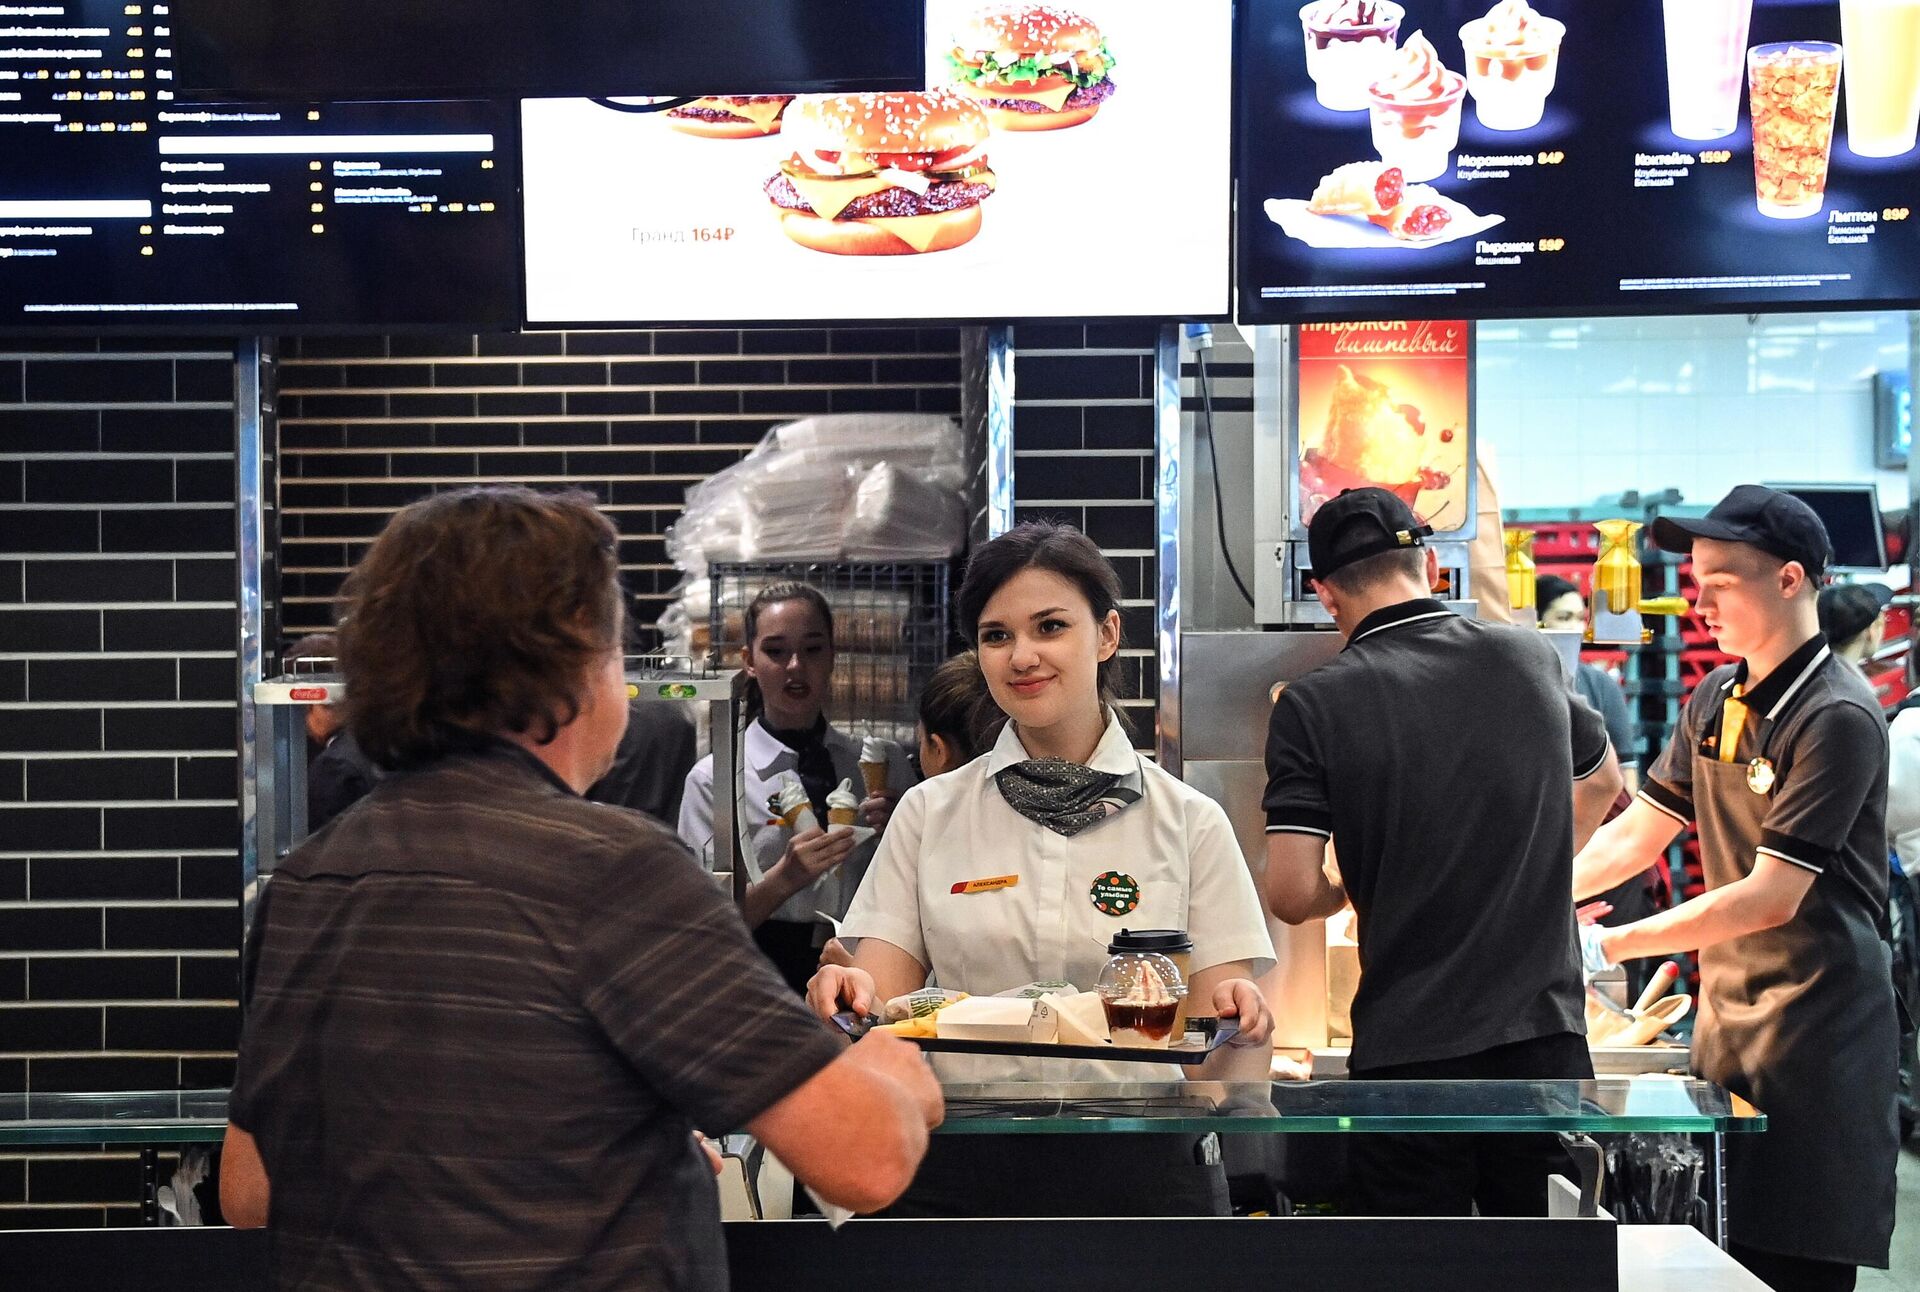 An employee gives an order to a customer in a joint of the newly opened fast food restaurant chain on Bolshaya Bronnaya Street in Moscow, Russia. The new chain of restaurants based on McDonald's is going to be called Vkusno i tochka (Delicious and that's it!). - Sputnik International, 1920, 12.06.2022